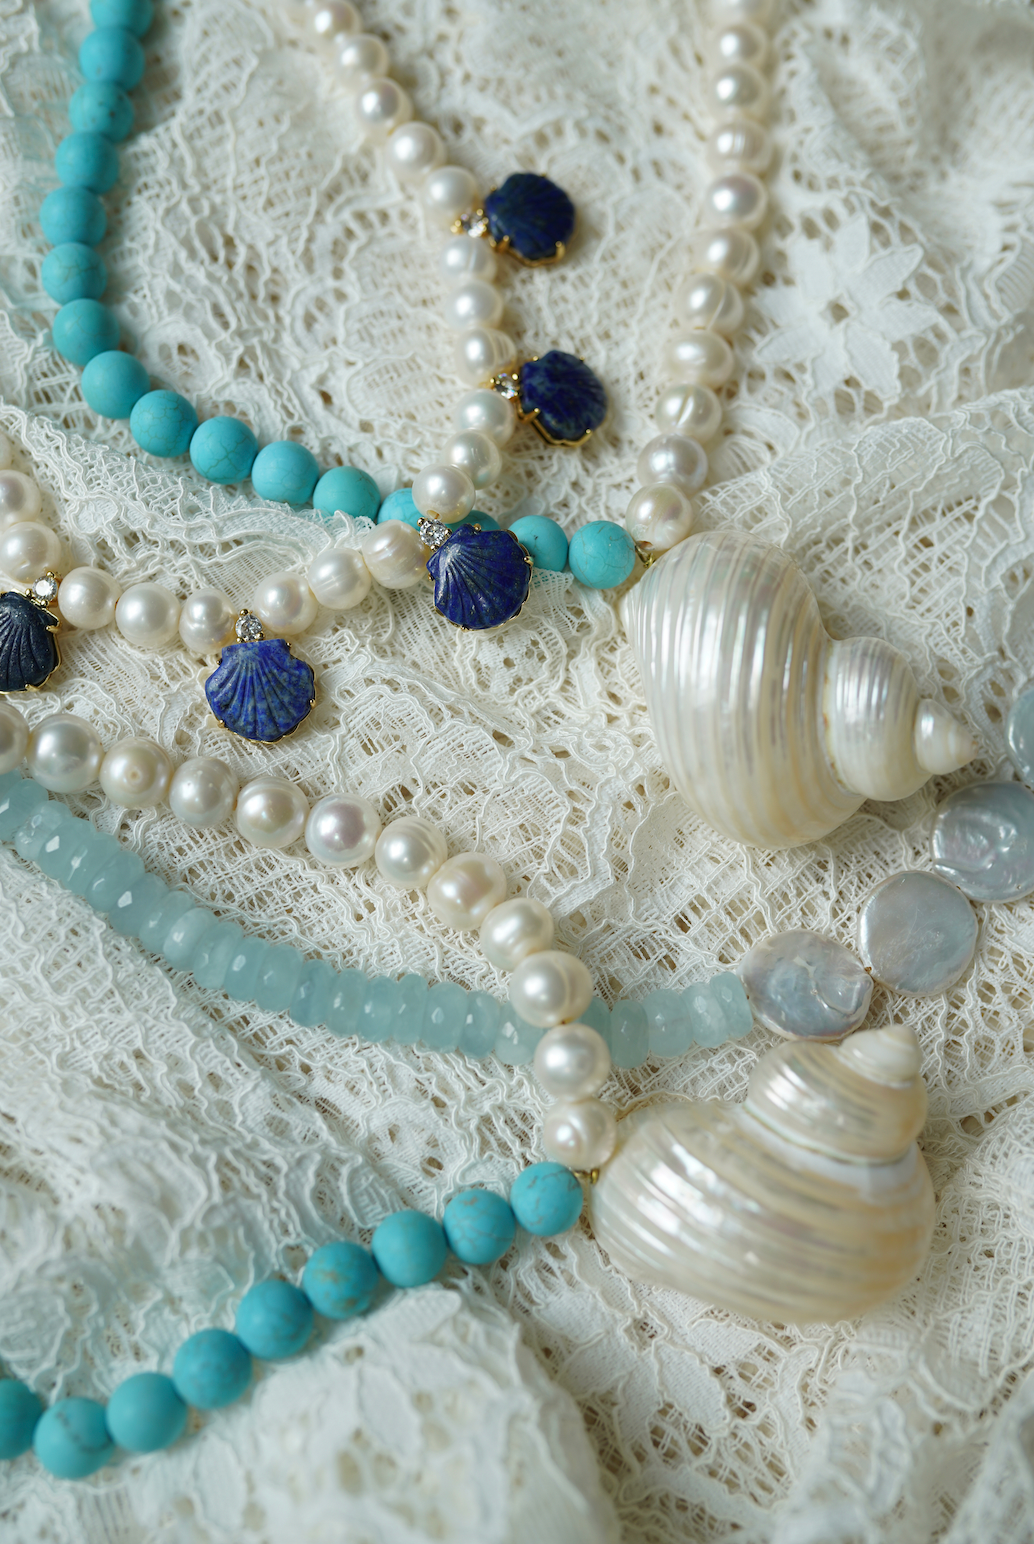 Limited Edition: Freshwater Pearl Coin & Blue Beaded Necklace